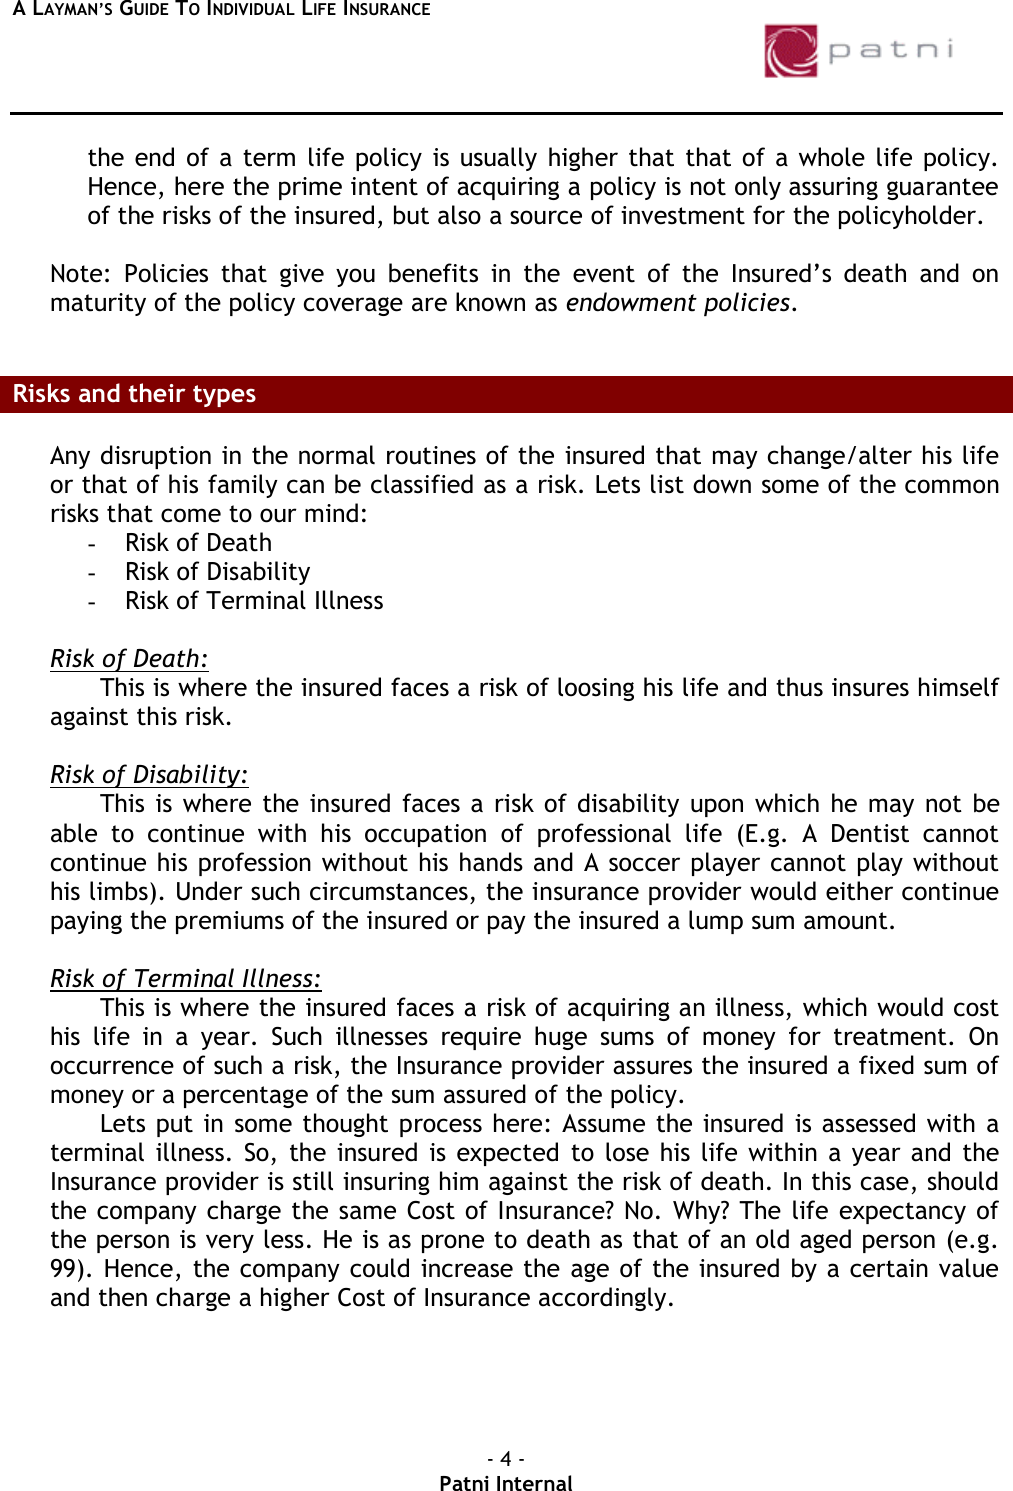 Page 4 of 11 - 45ADE867-21EA-28BEF3 A Laymans Guide To Individual Life-Insurance